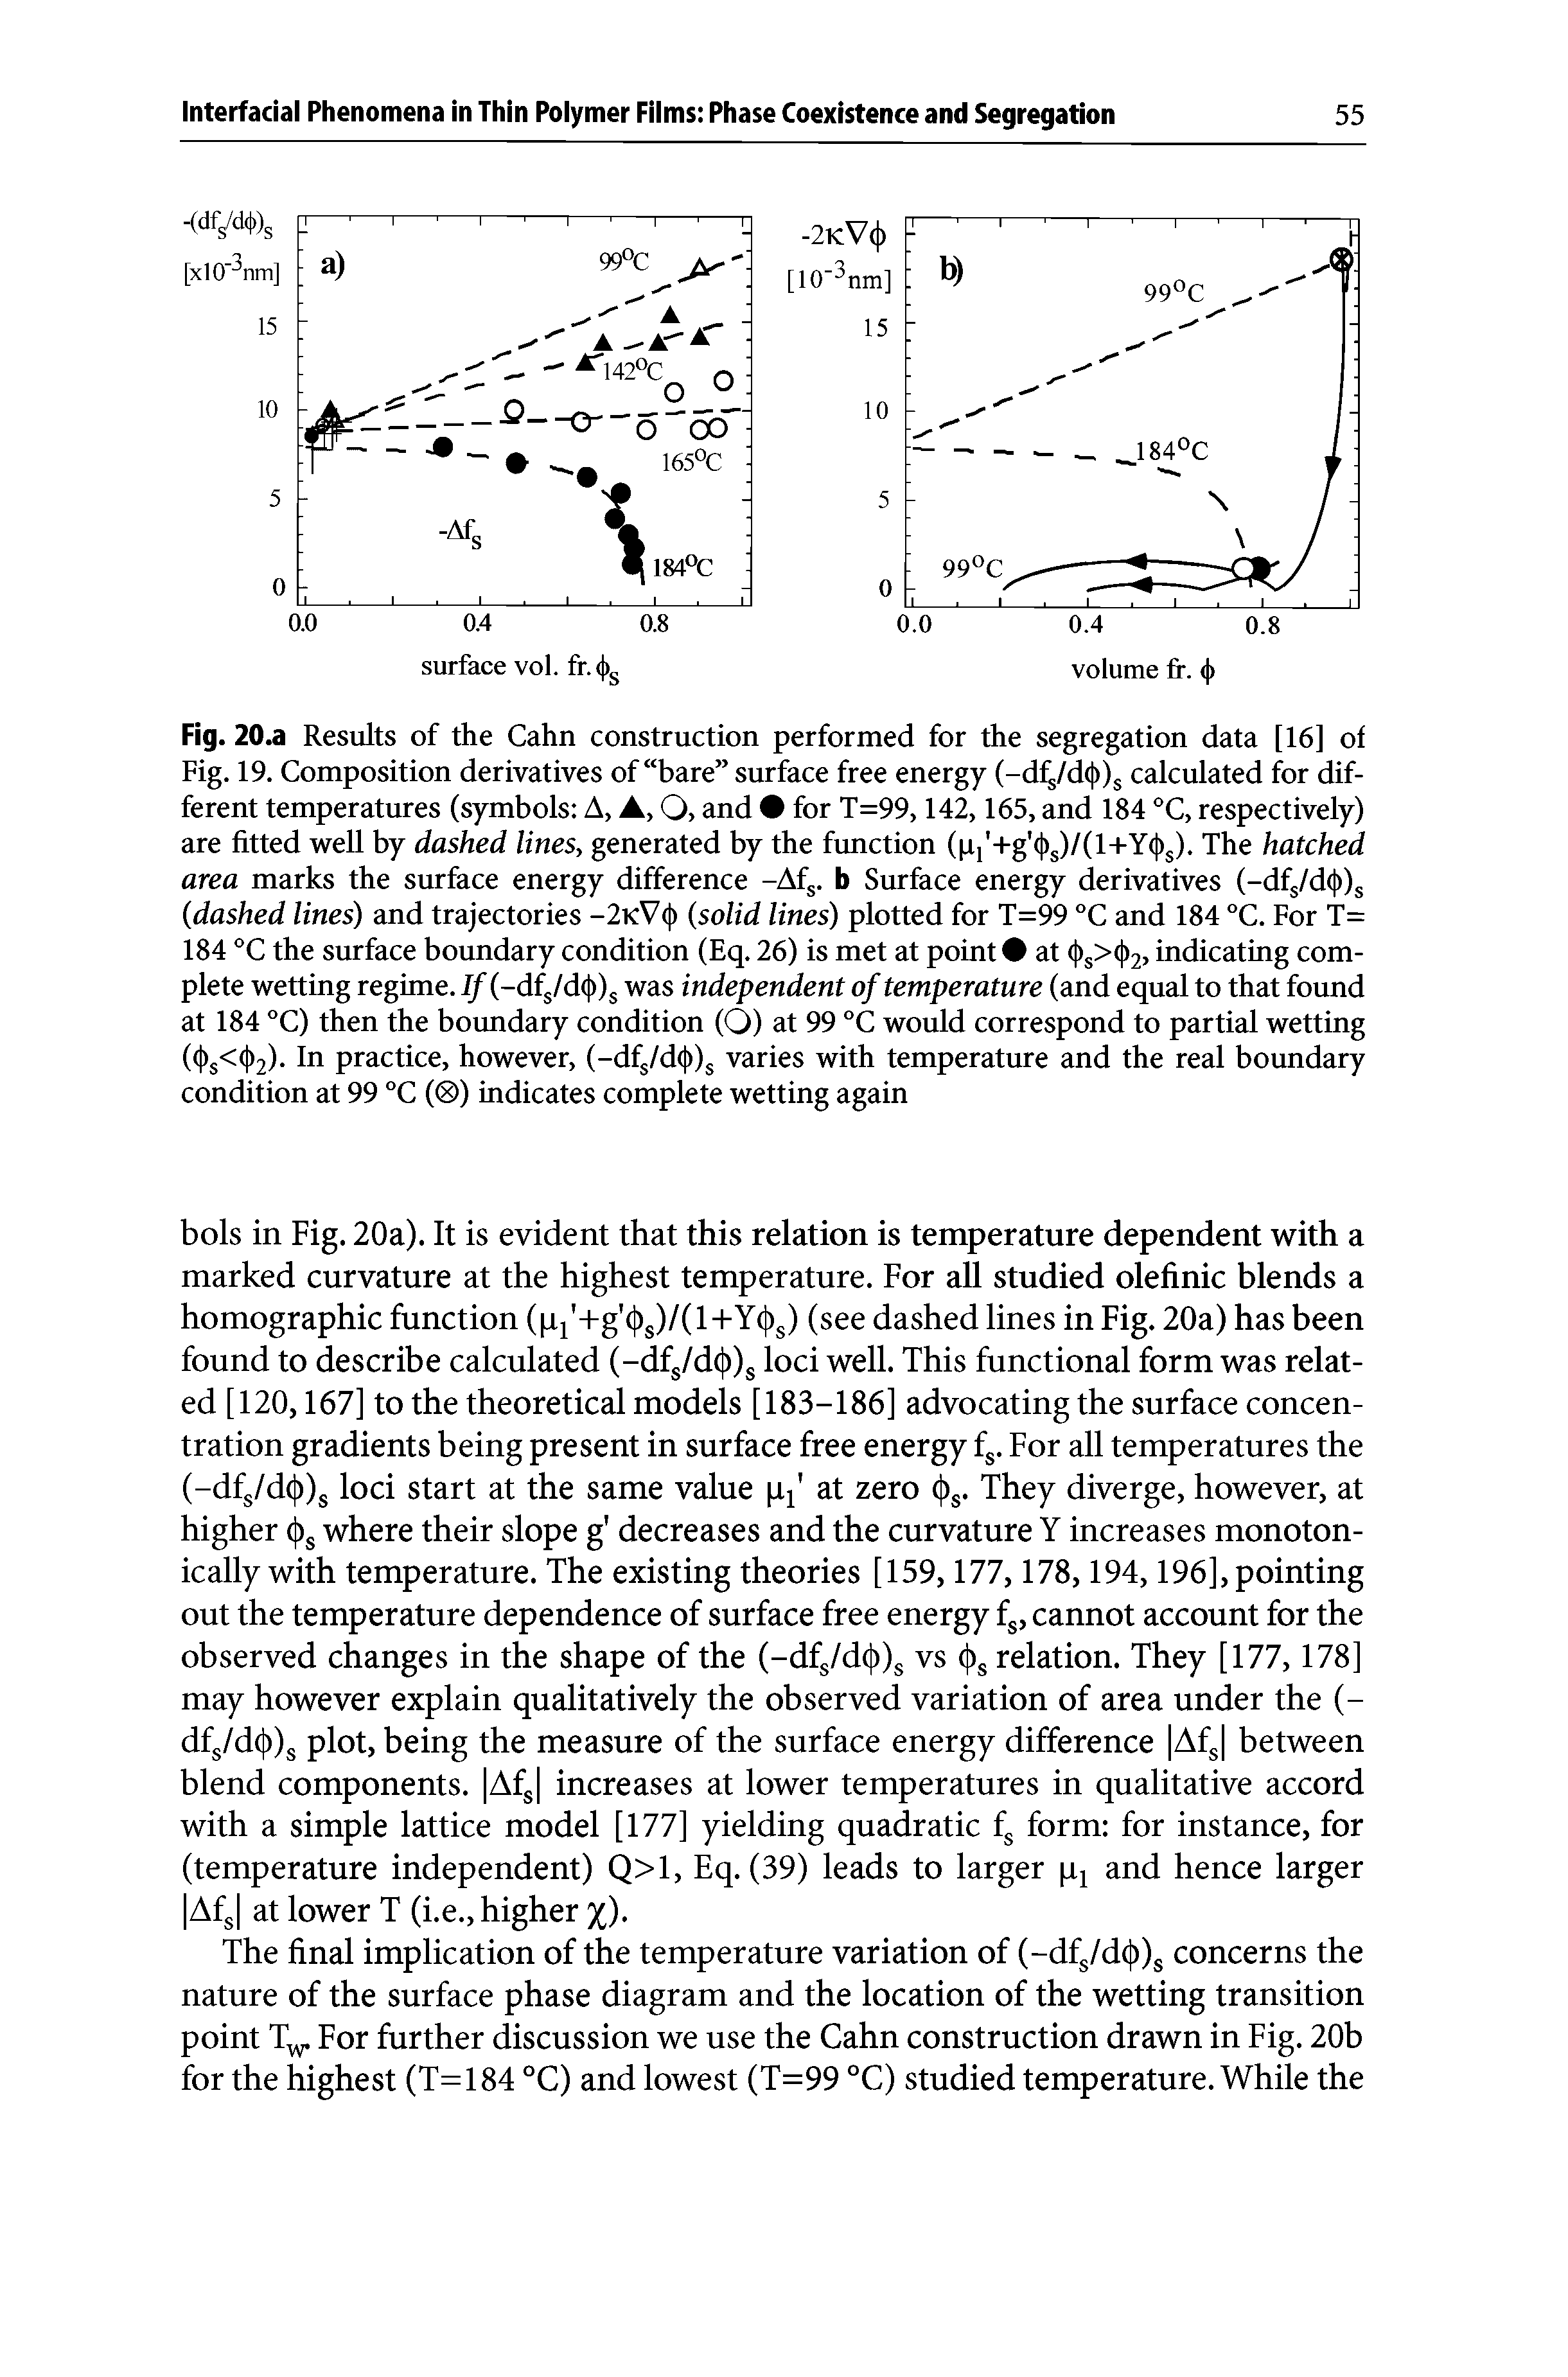 Fig. 20.a Results of the Cahn construction performed for the segregation data [16] of Fig. 19. Composition derivatives of bare surface free energy (-dfs/d( ))s calculated for different temperatures (symbols A, , O, and for T=99,142,165, and 184 °C, respectively) are fitted well by dashed lines, generated by the function (pf+g /ll+Y s). The hatched area marks the surface energy difference -Afs. b Surface energy derivatives (—dfs/d( >)s (dashed lines) and trajectories -2kV< ) (solid lines) plotted for T=99 °C and 184 °C. For T= 184 °C the surface boundary condition (Eq. 26) is met at point at ( >s>( >2, indicating complete wetting regime. If (—dfs/d([ )s was independent of temperature (and equal to that found at 184 °C) then the boundary condition (O) at 99 °C would correspond to partial wetting (c >s<( >2). In practice, however, (—dfs/d([ )s varies with temperature and the real boundary condition at 99 °C ( ) indicates complete wetting again...